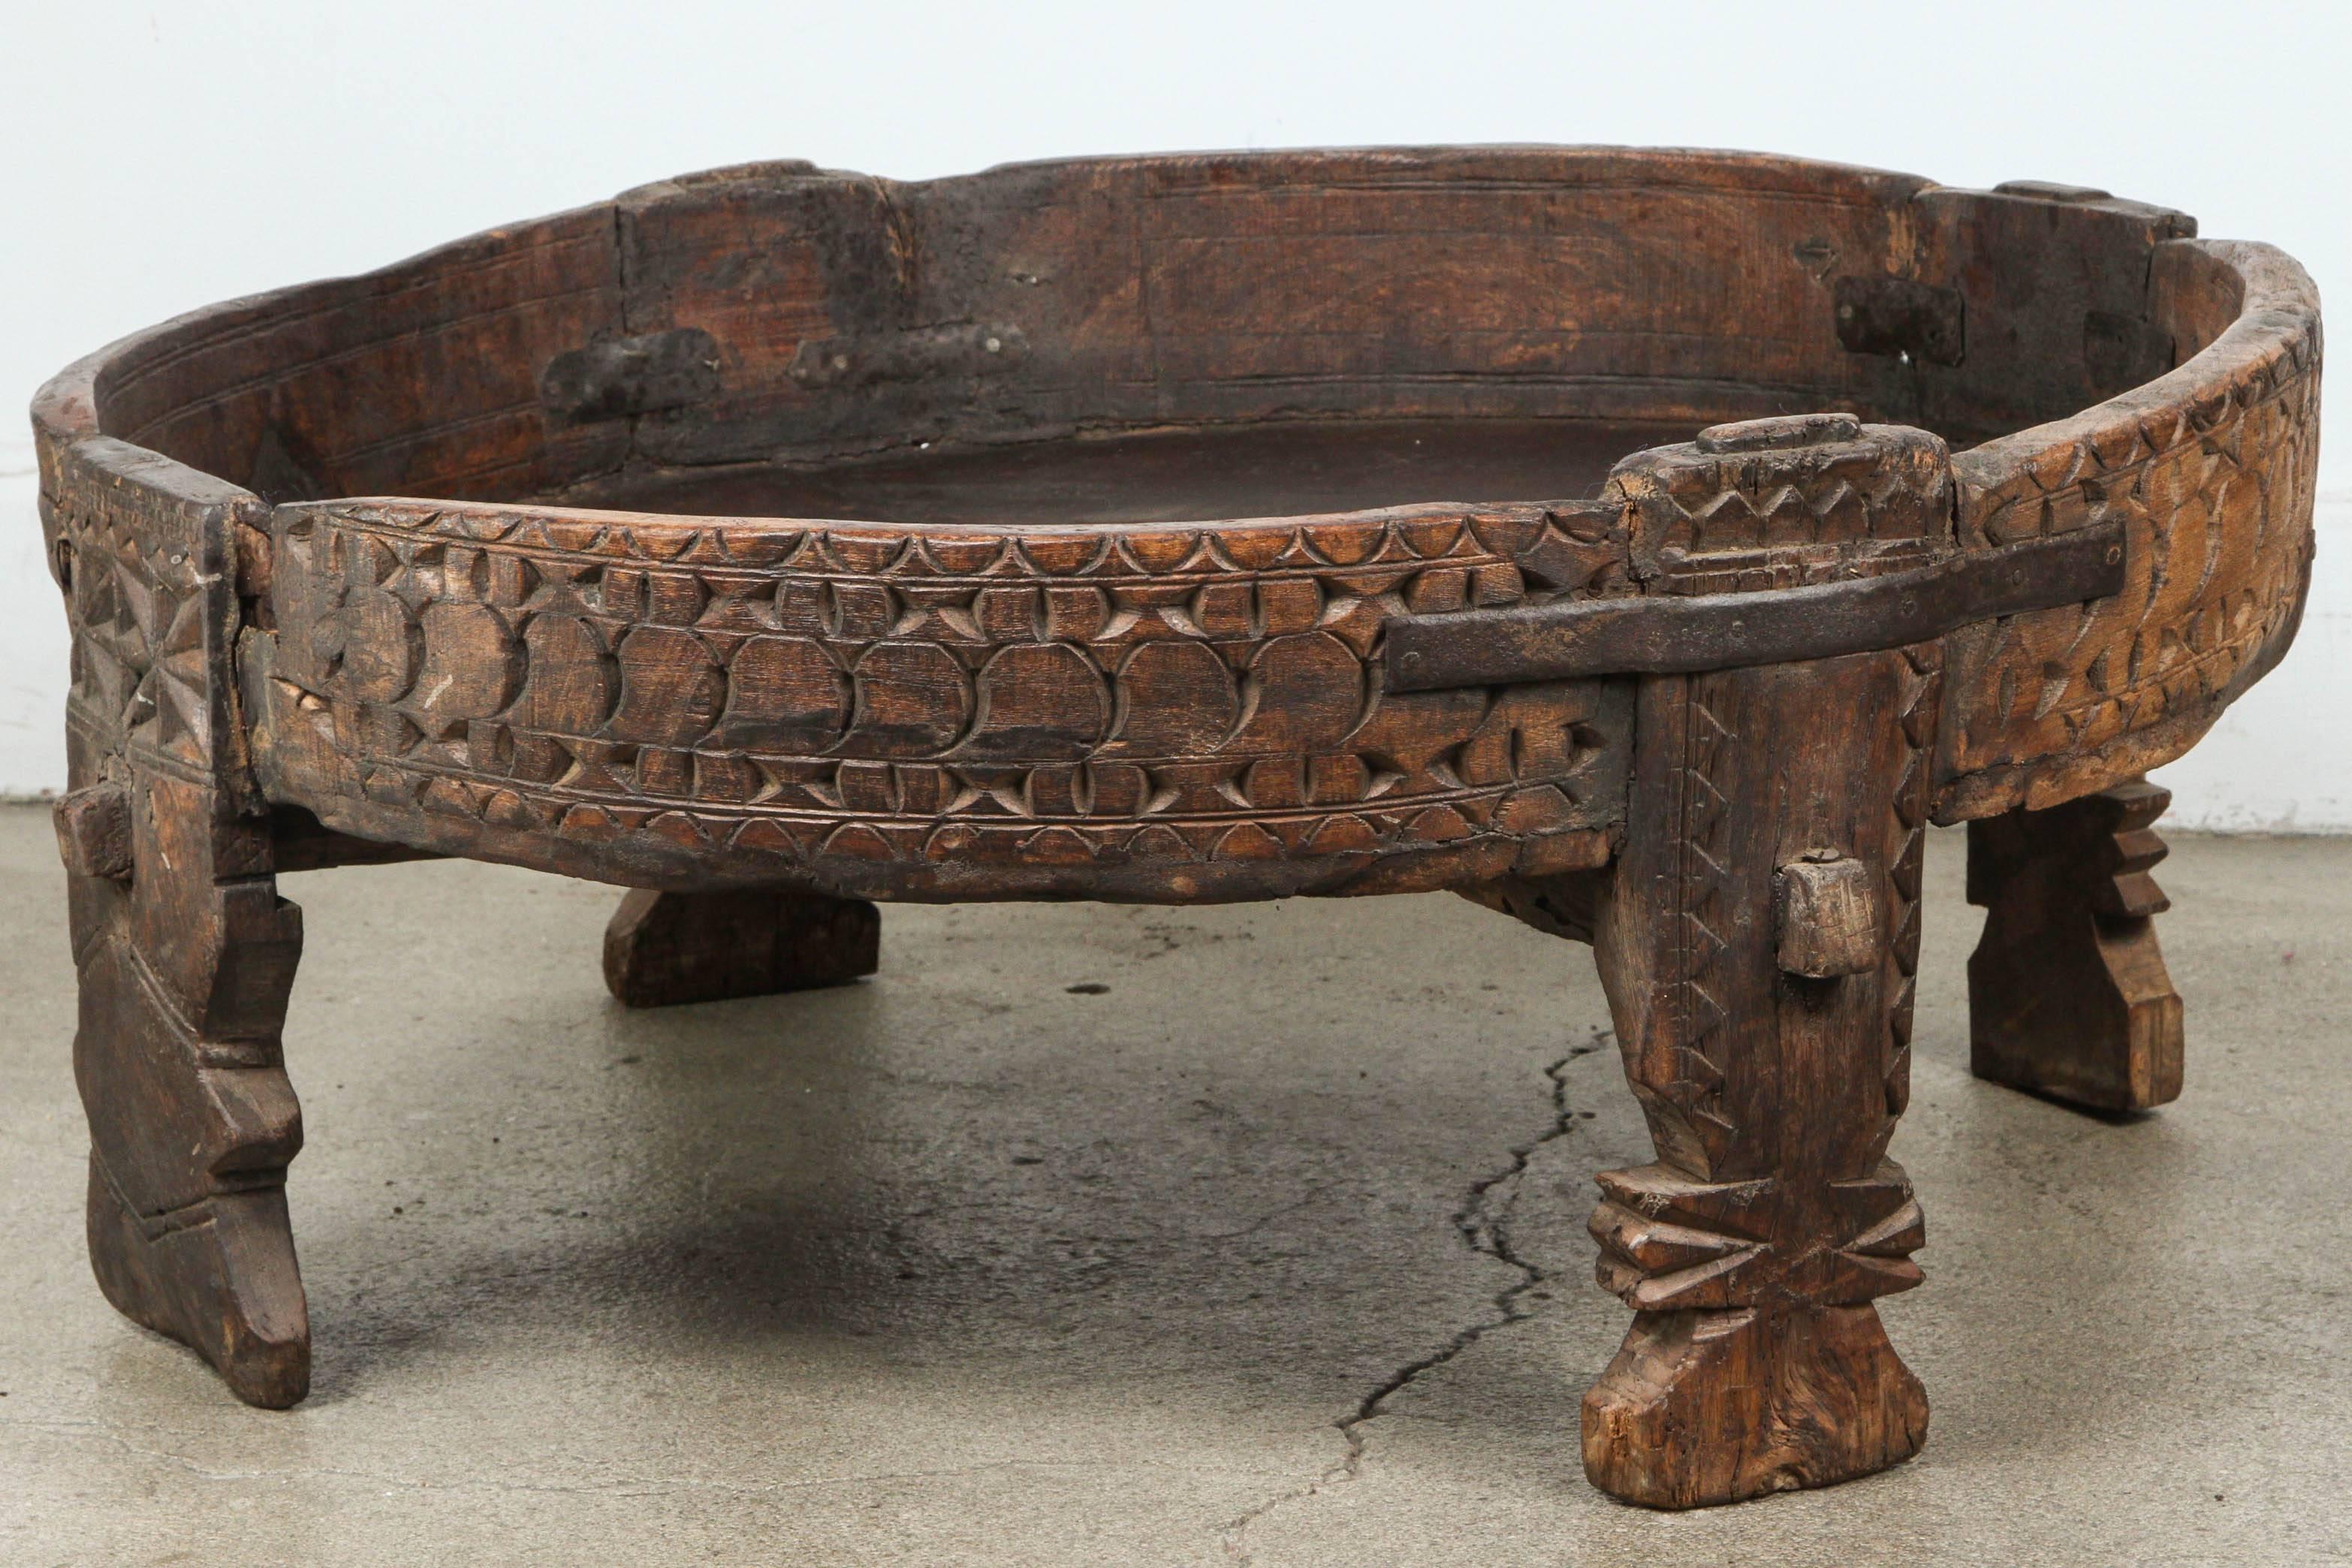 Carved Moroccan Round Wooden Tribal Table